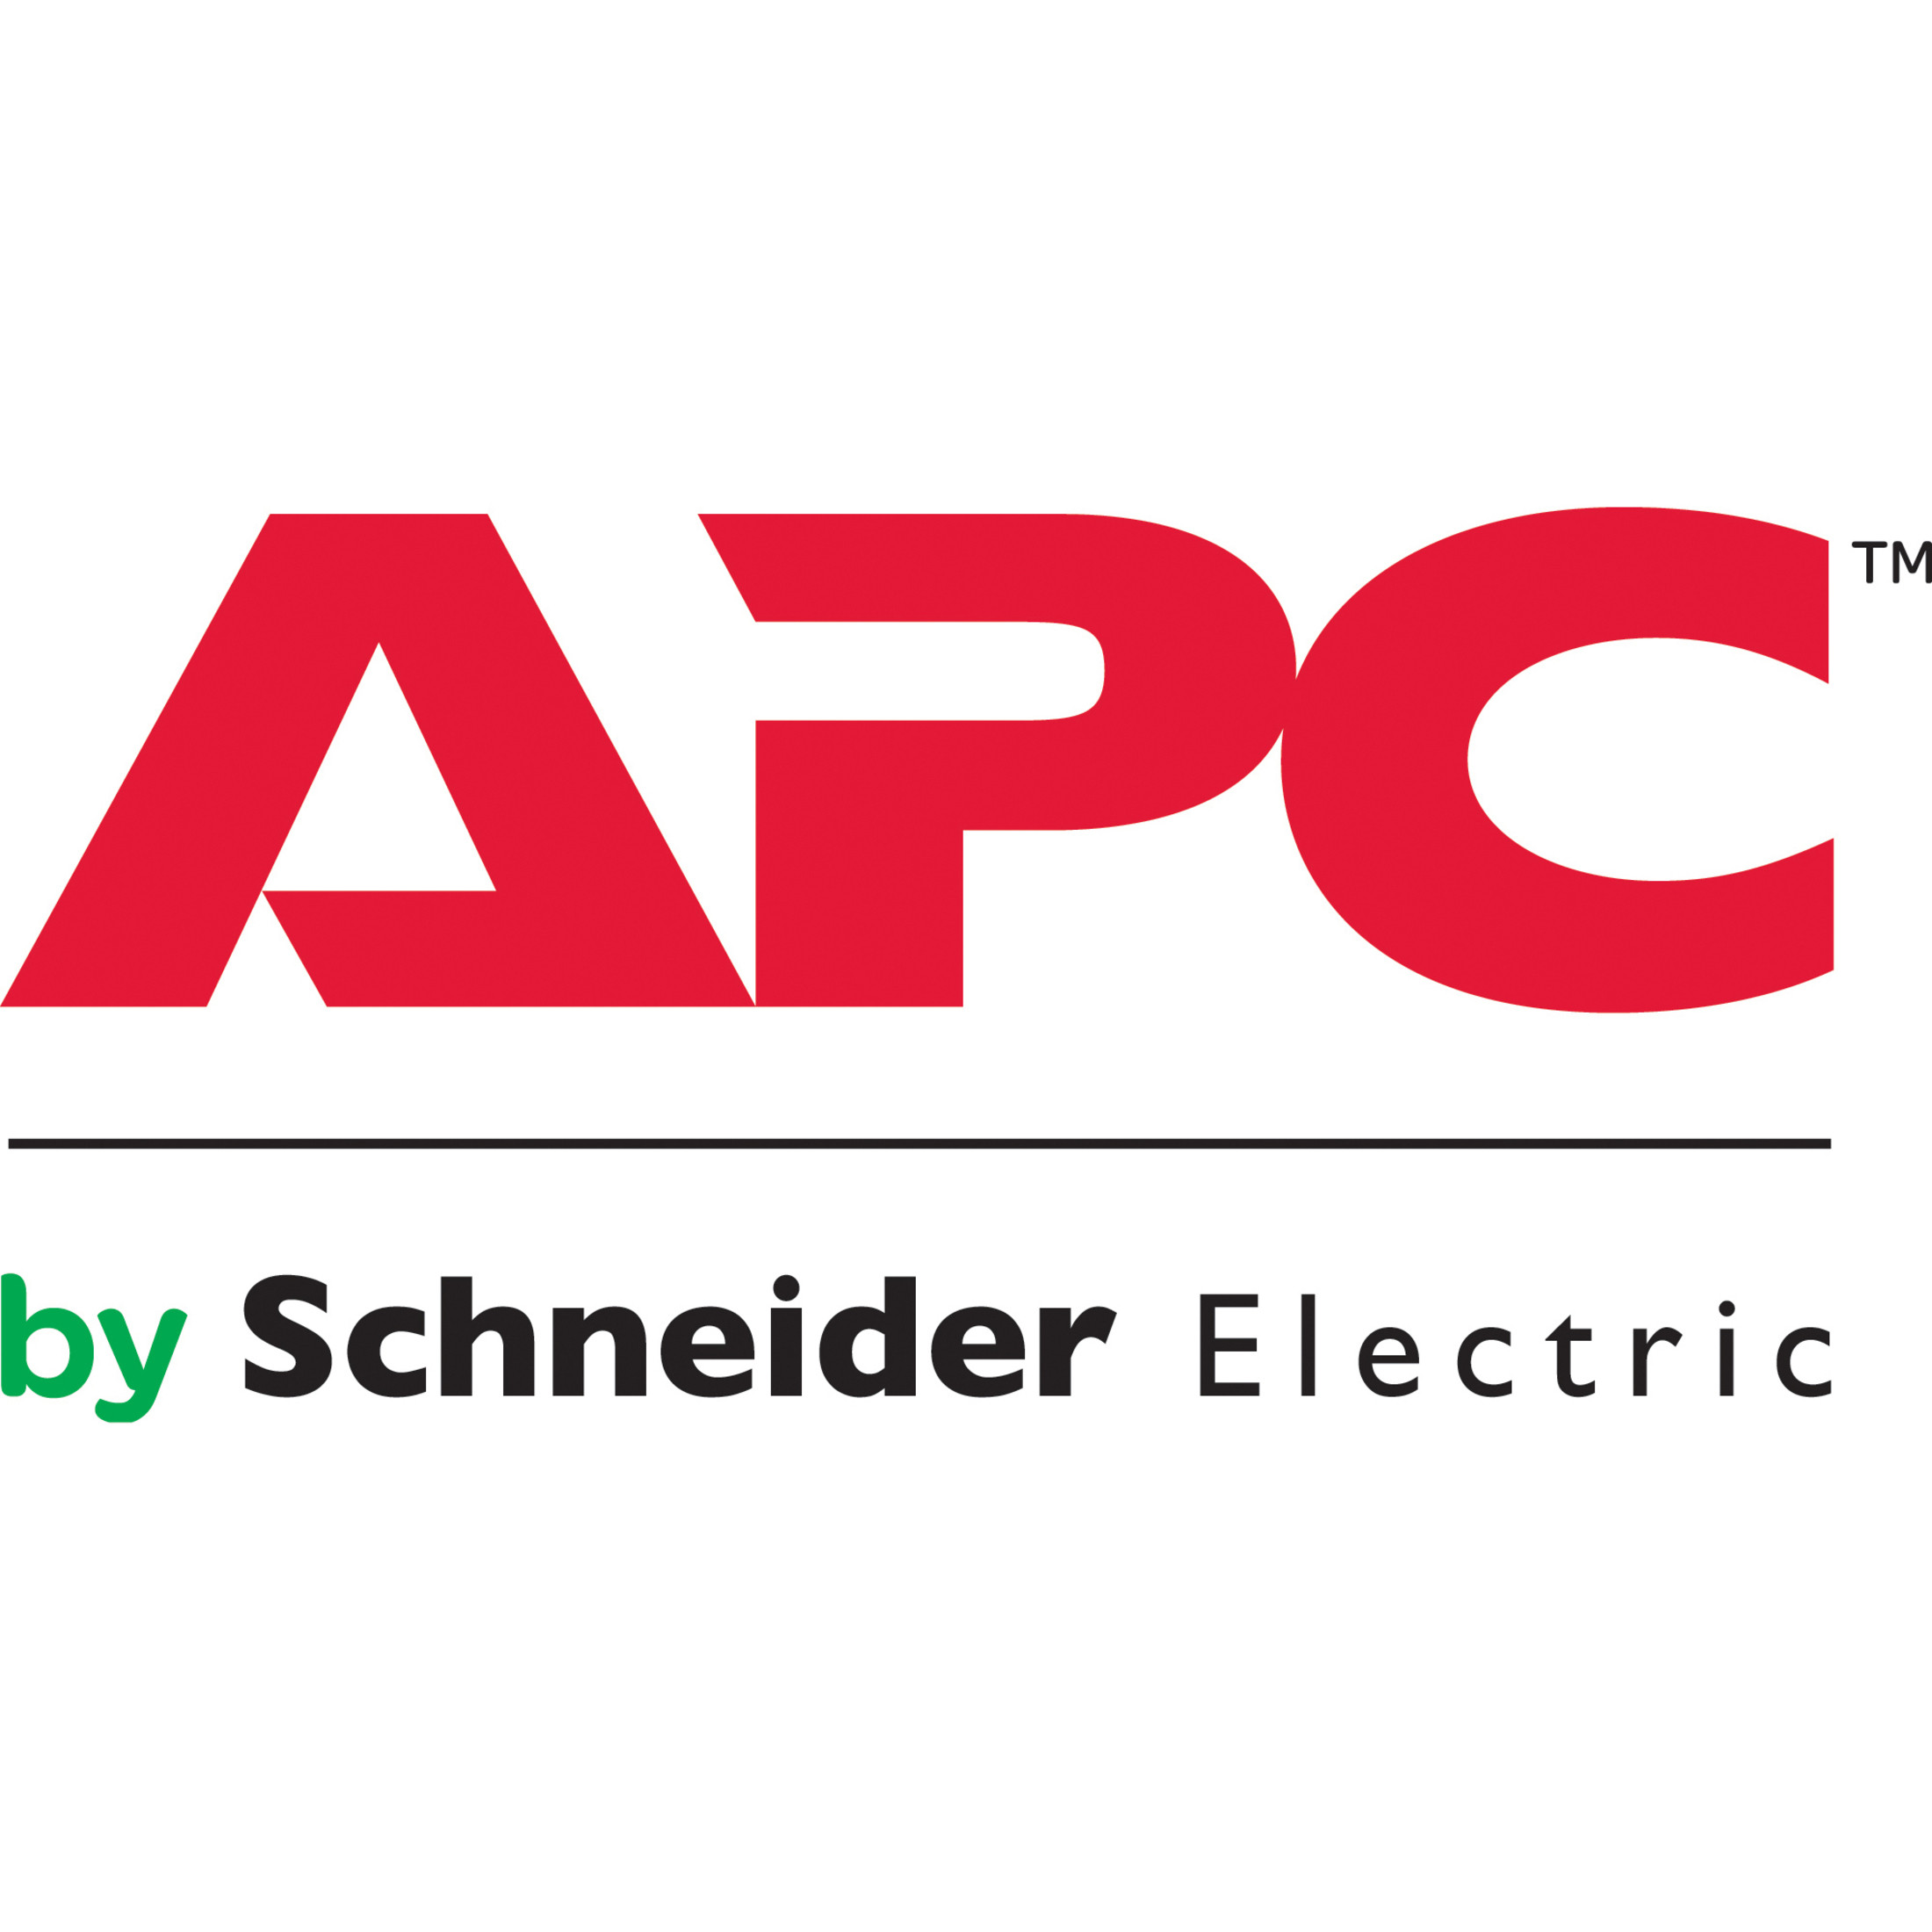 APC by Schneider Electric Assembly ServiceService8 x 5InstallationLaborElectronic and Physical WASSEM-VX-102